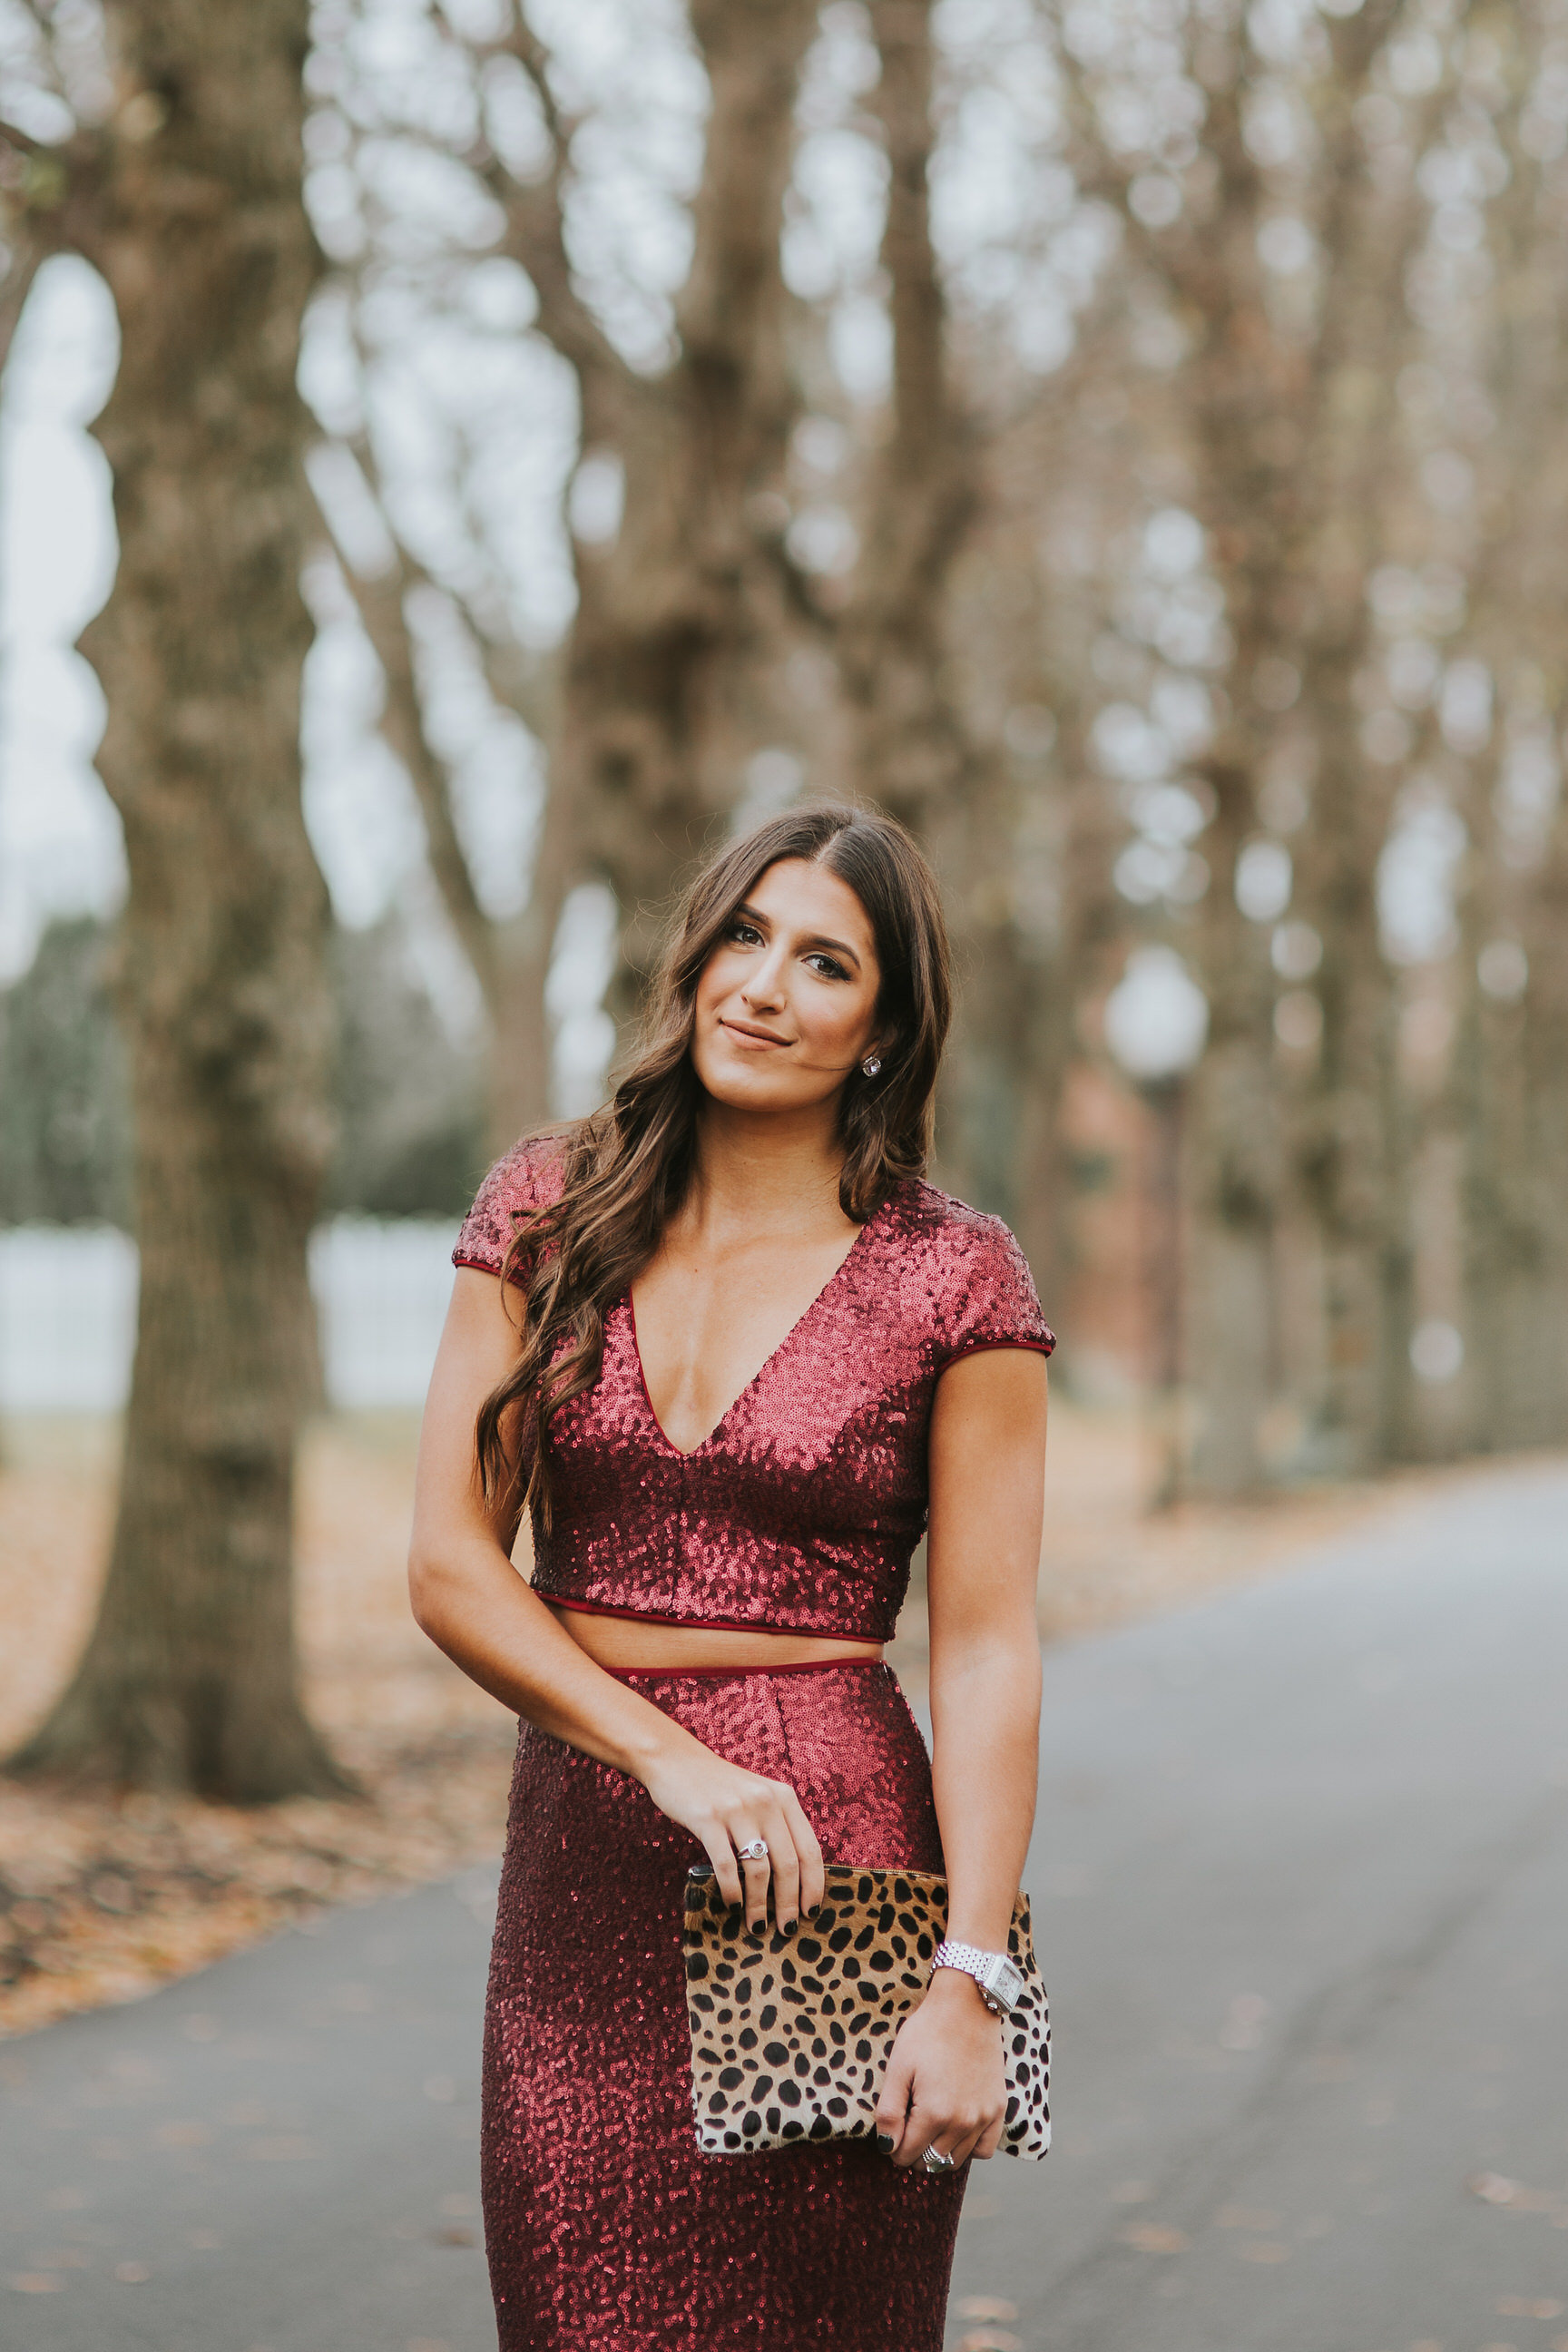 sequin two piece gown, sequin gown, new years eve outfit, new years outfit, new years dress, sequin maxi dress, sequin crop top, leopard clutch, calf hair clutch, nye dress, fancy nye outfit // grace wainwright a southern drawl